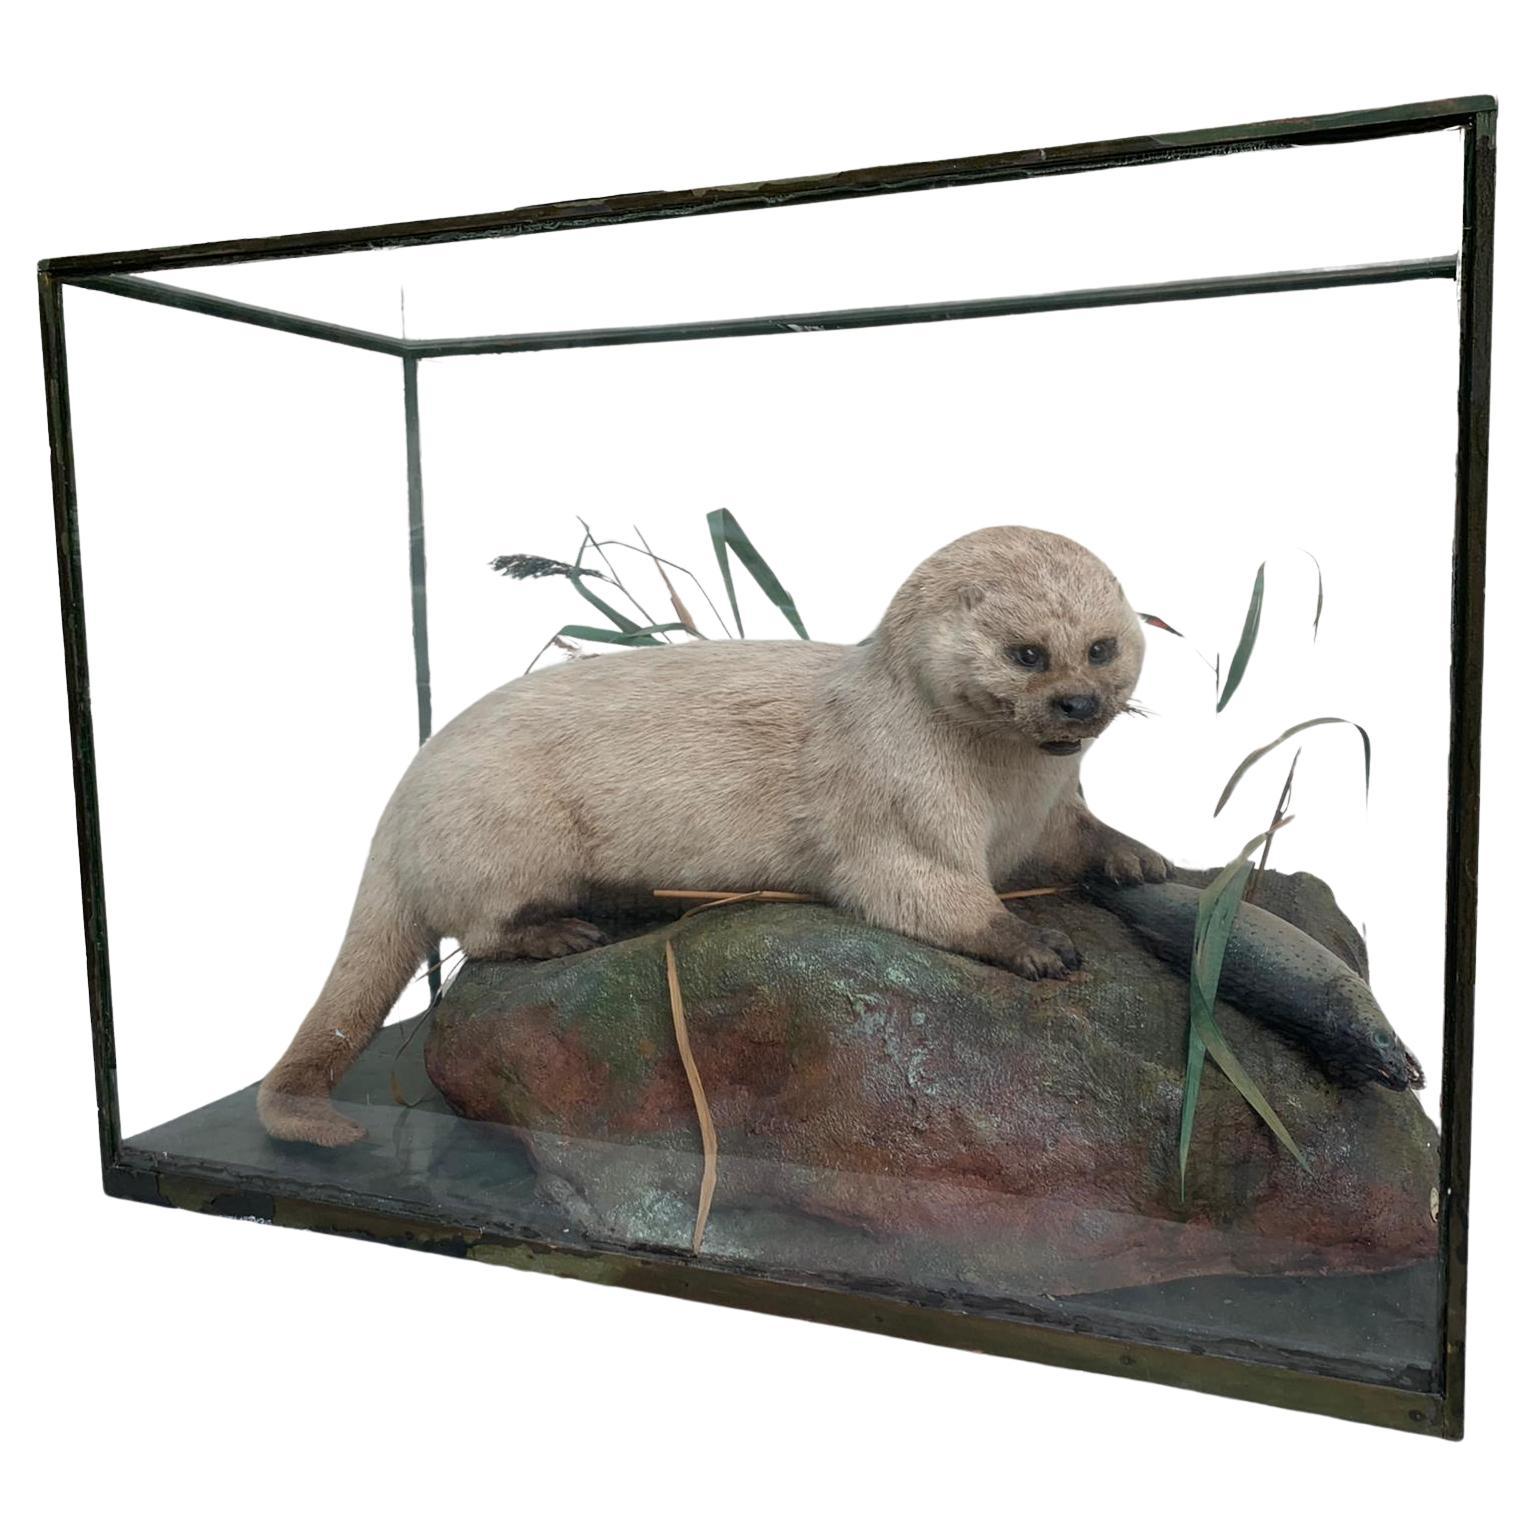 Otter and Loss, Taxidermy in a Glass Machine, London Piccadilly